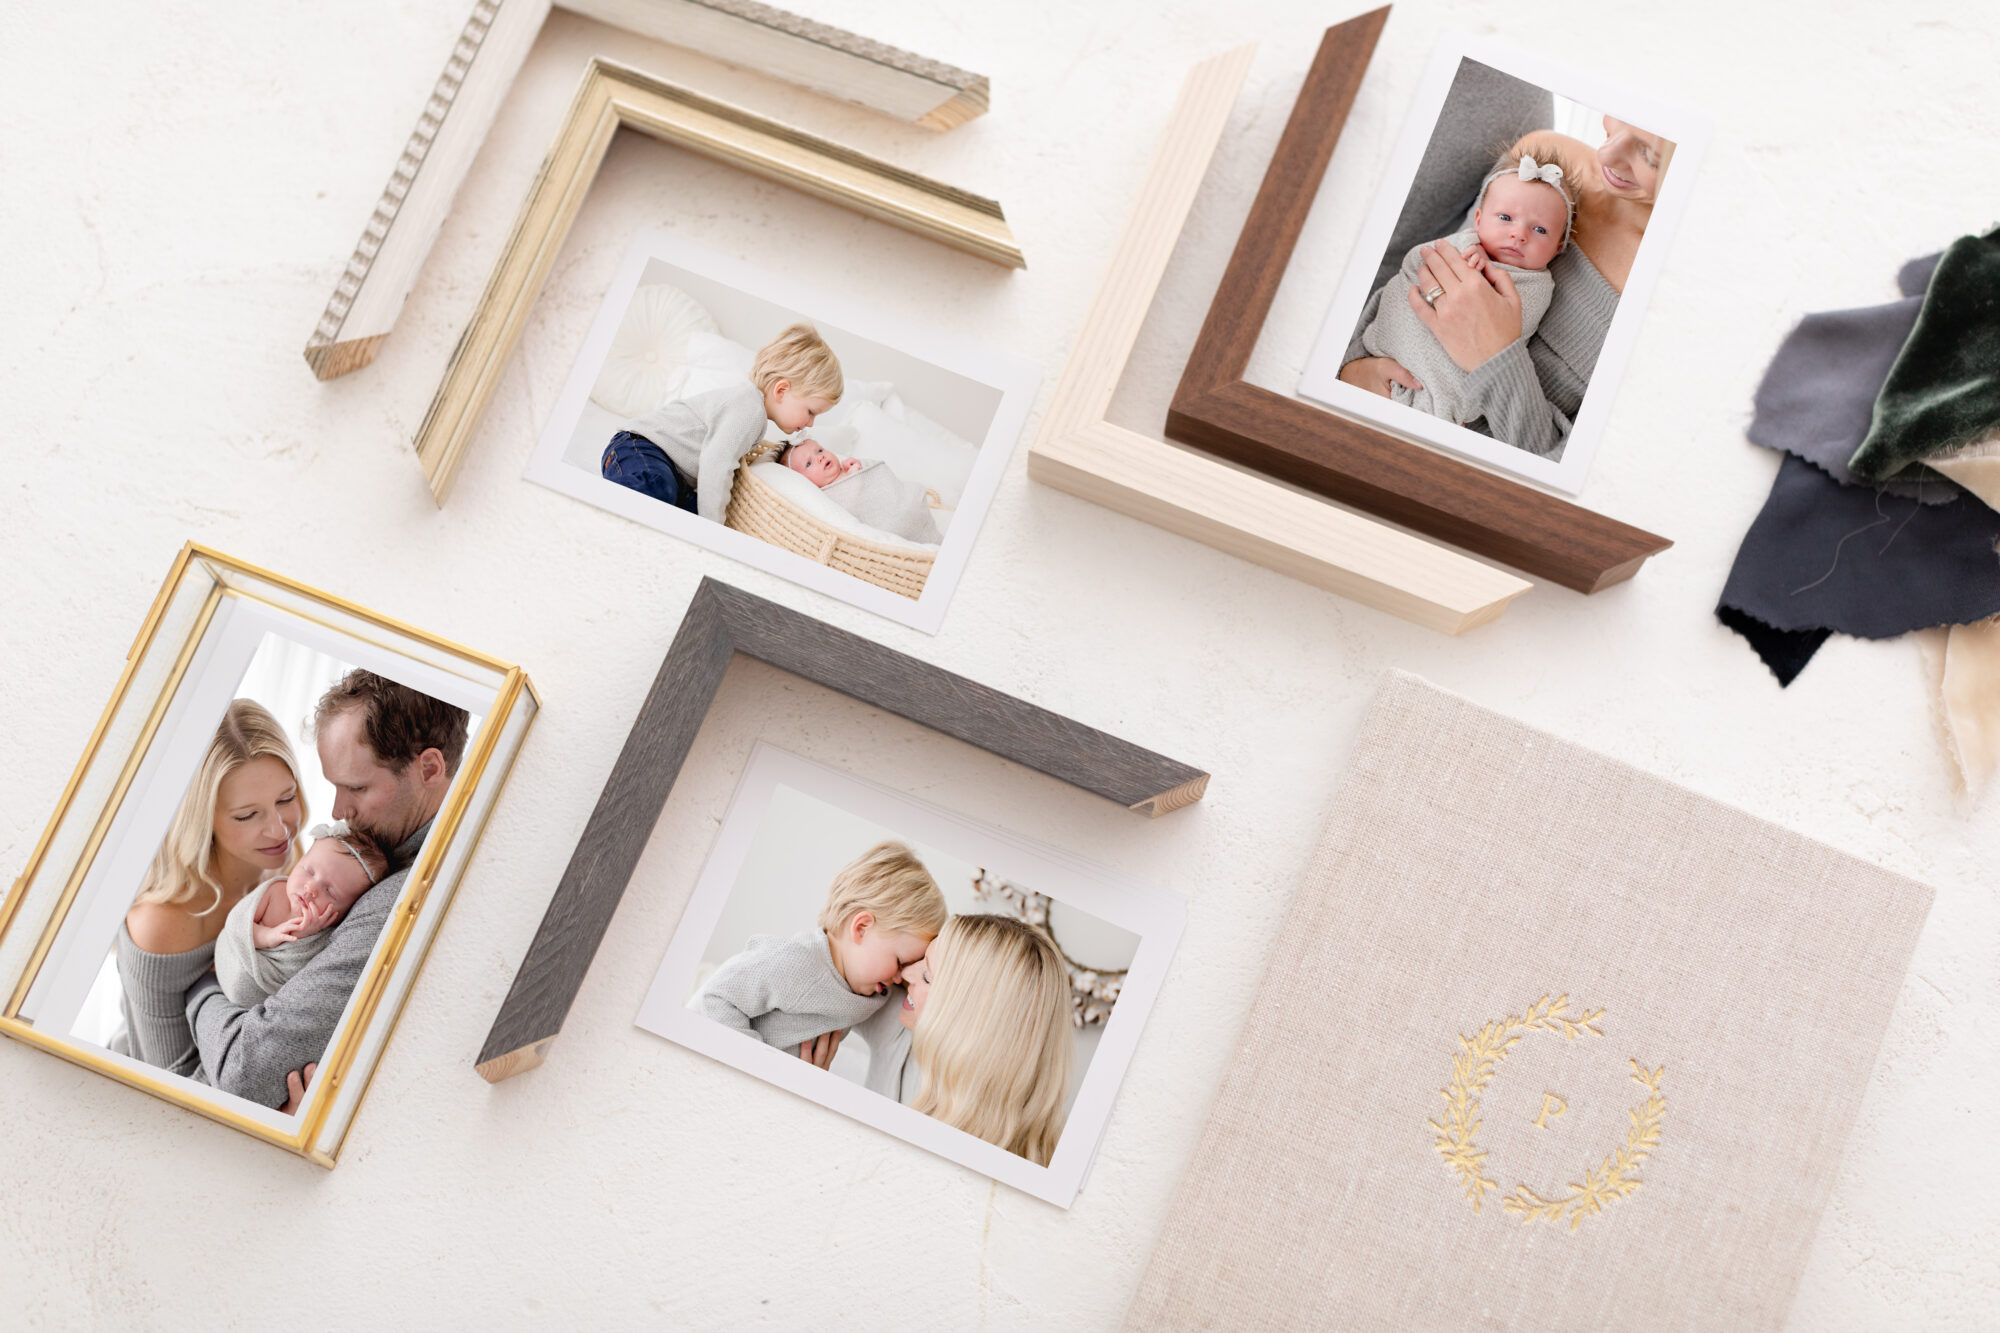 frame samples and printed photographs alongside heirloom albums and cover samples show professional photography products available.